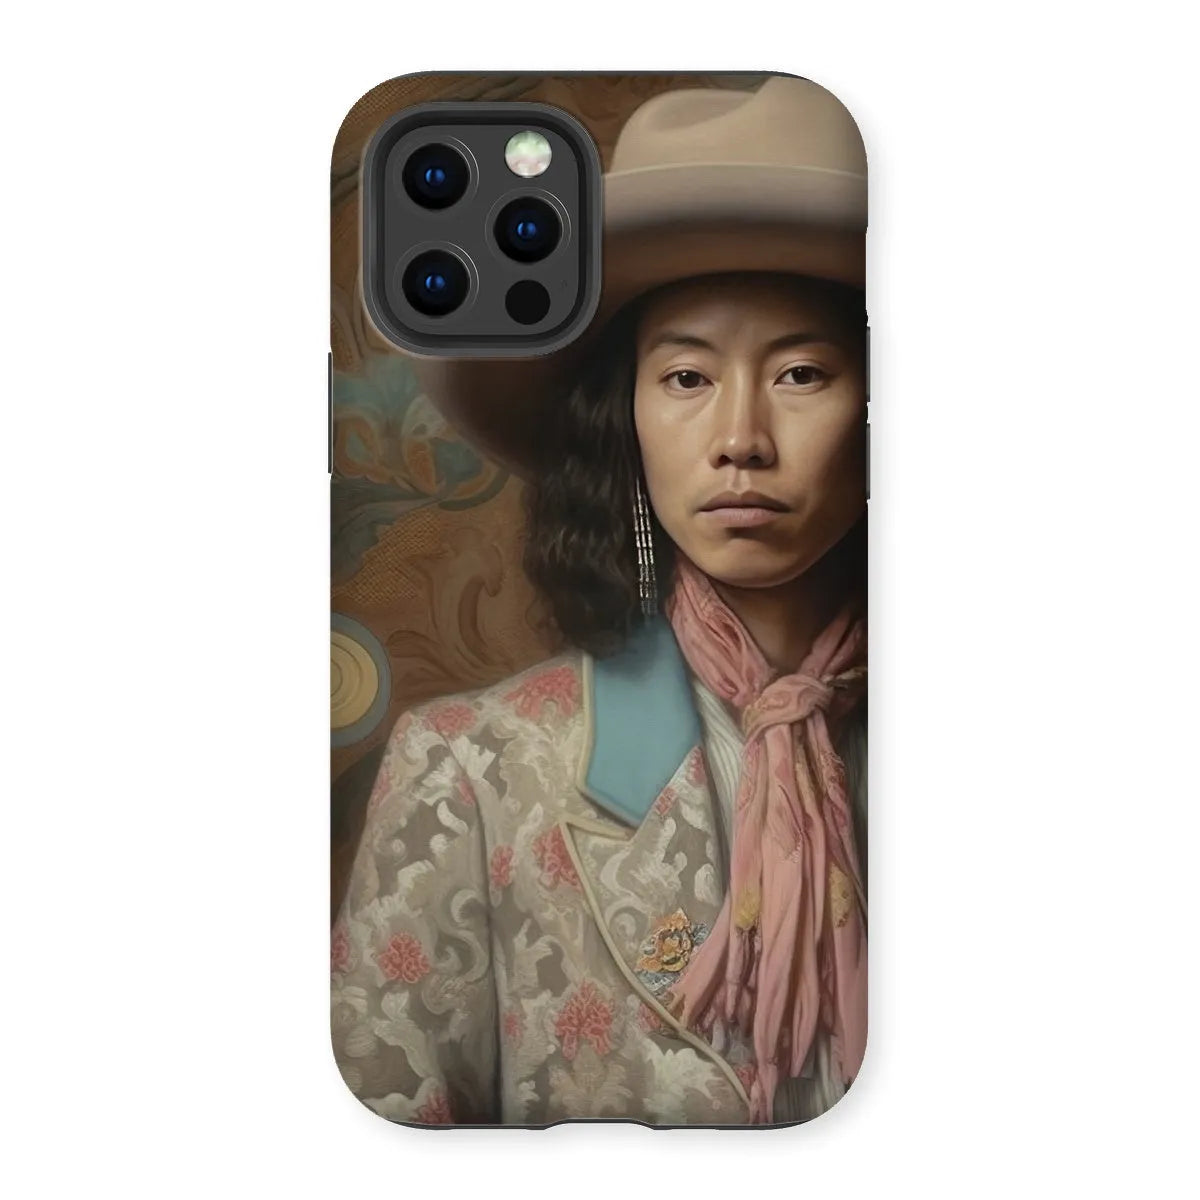 Dorjee The Gay Cowboy - Dandy Gay Aesthetic Art Phone Case - Iphone 12 Pro / Matte - Mobile Phone Cases - Aesthetic Art